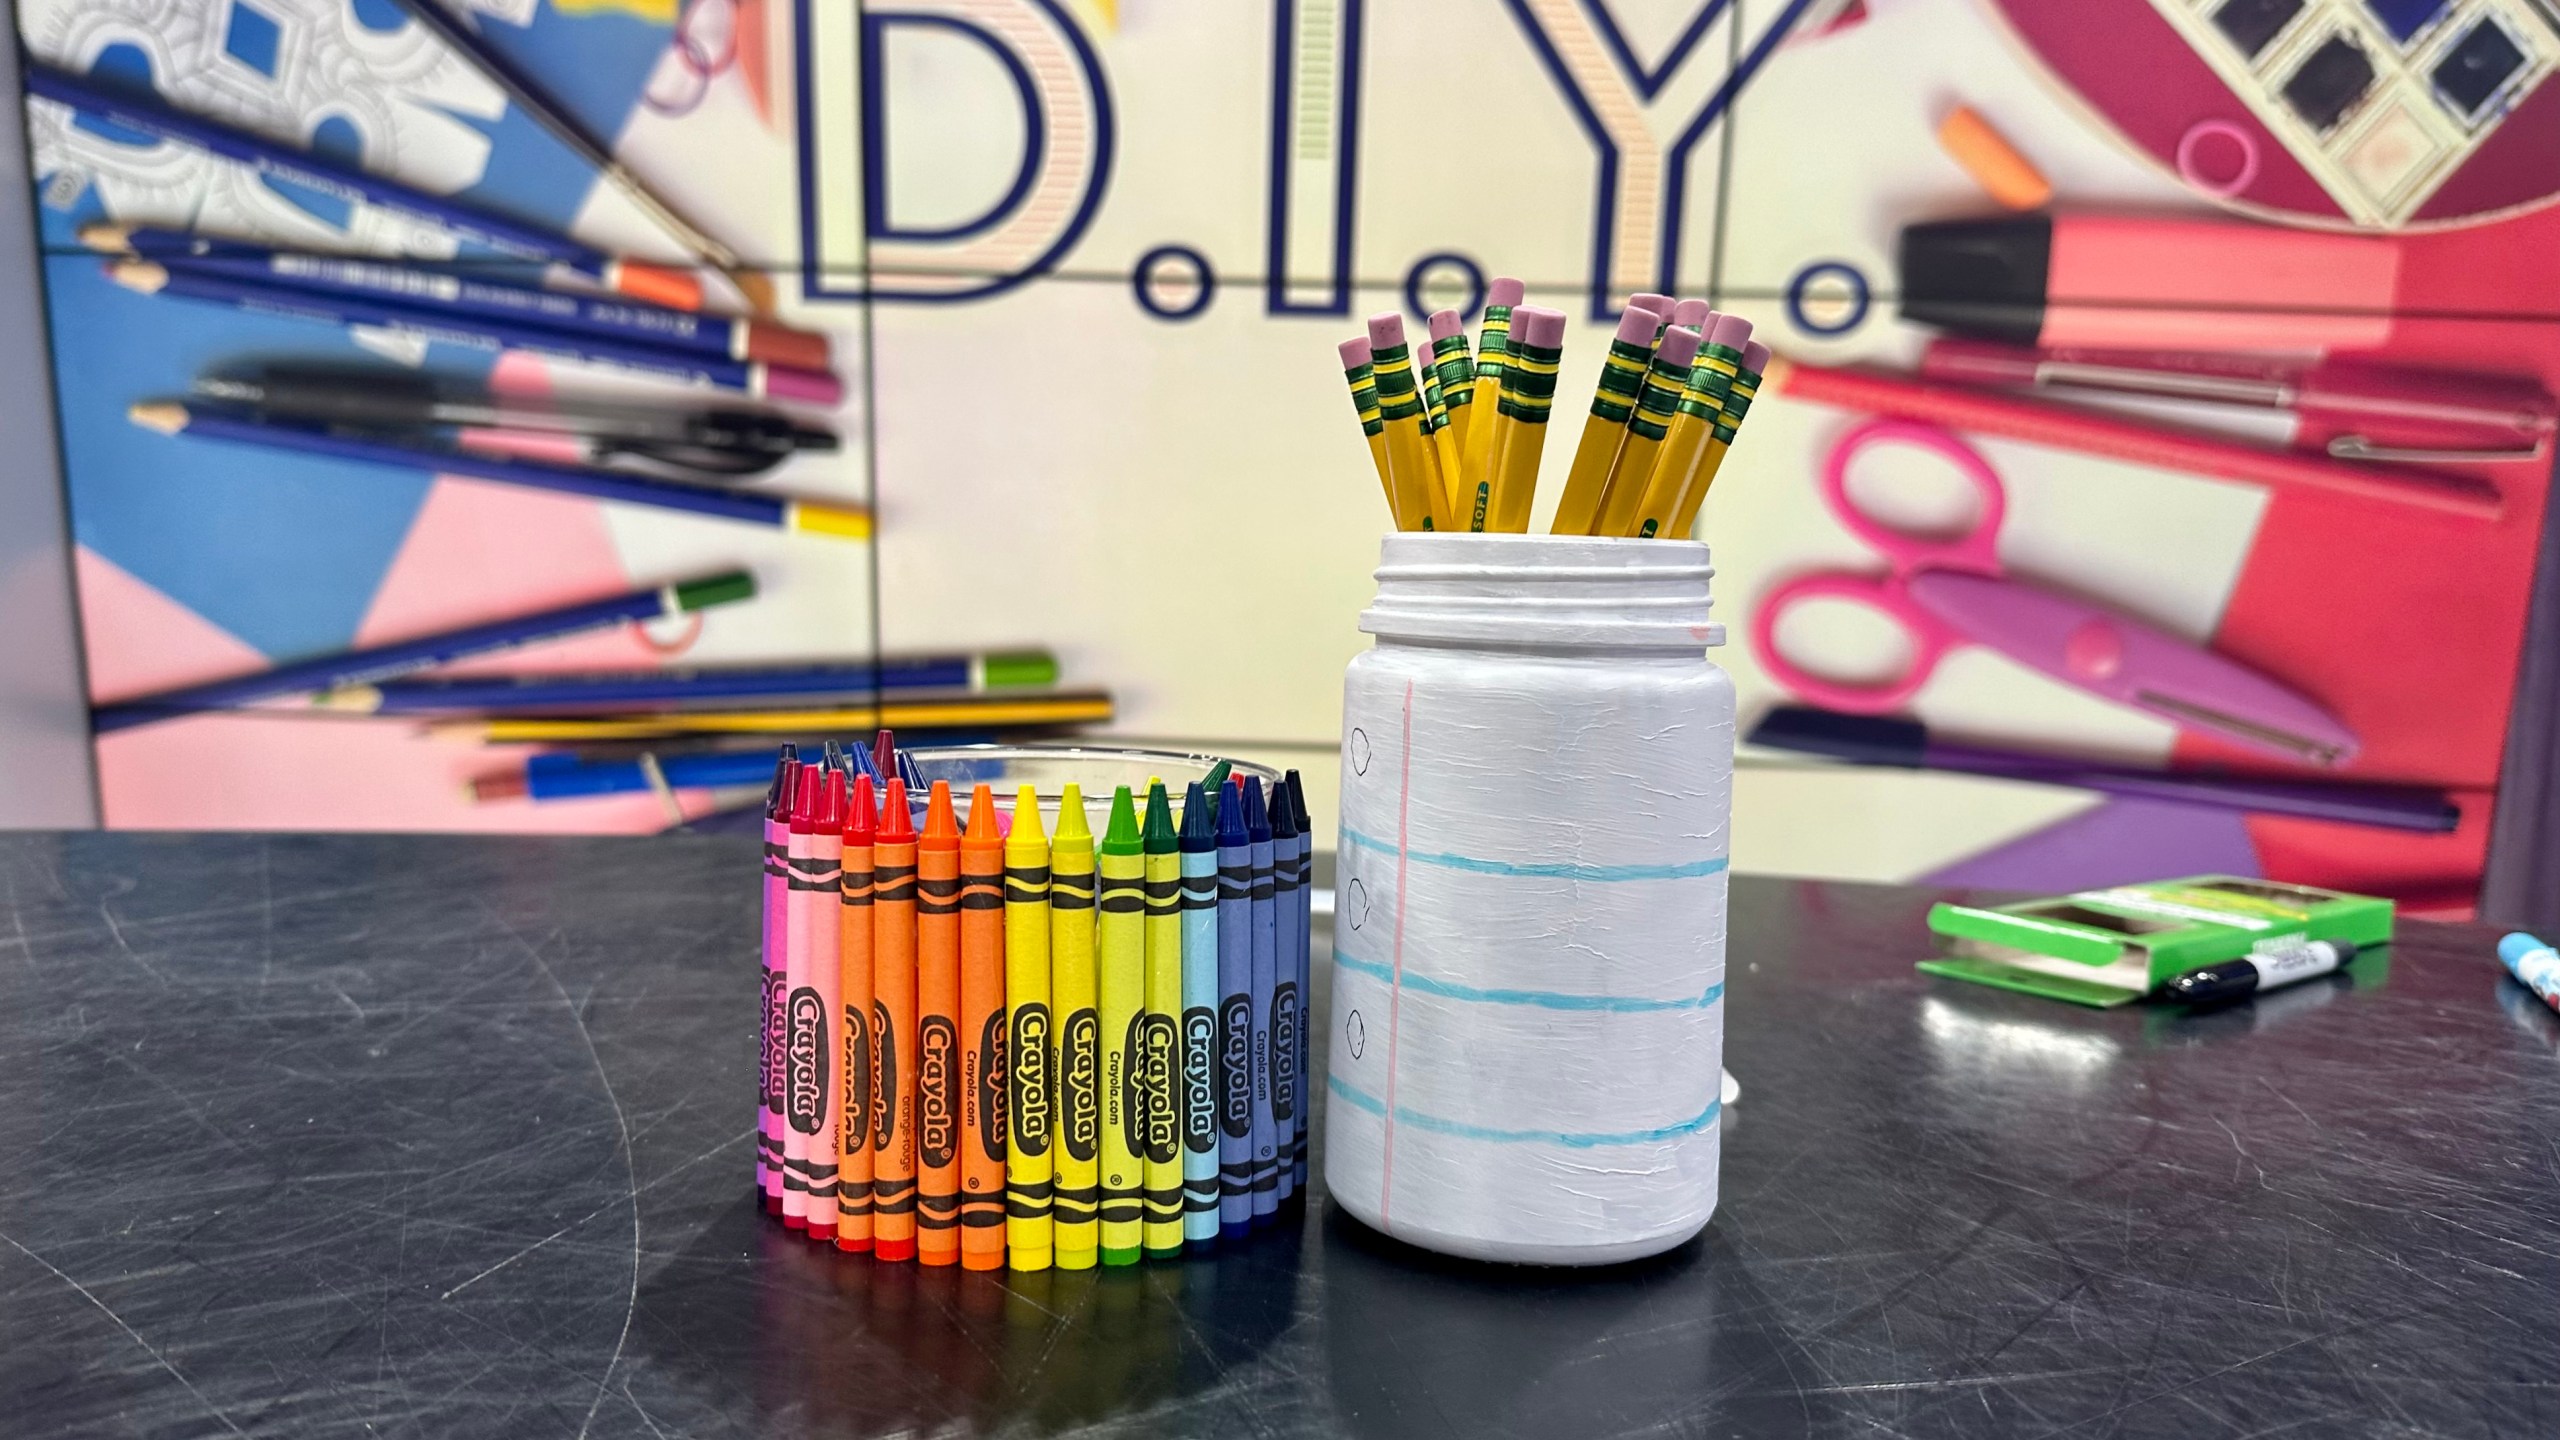 DIY Teacher gift containers